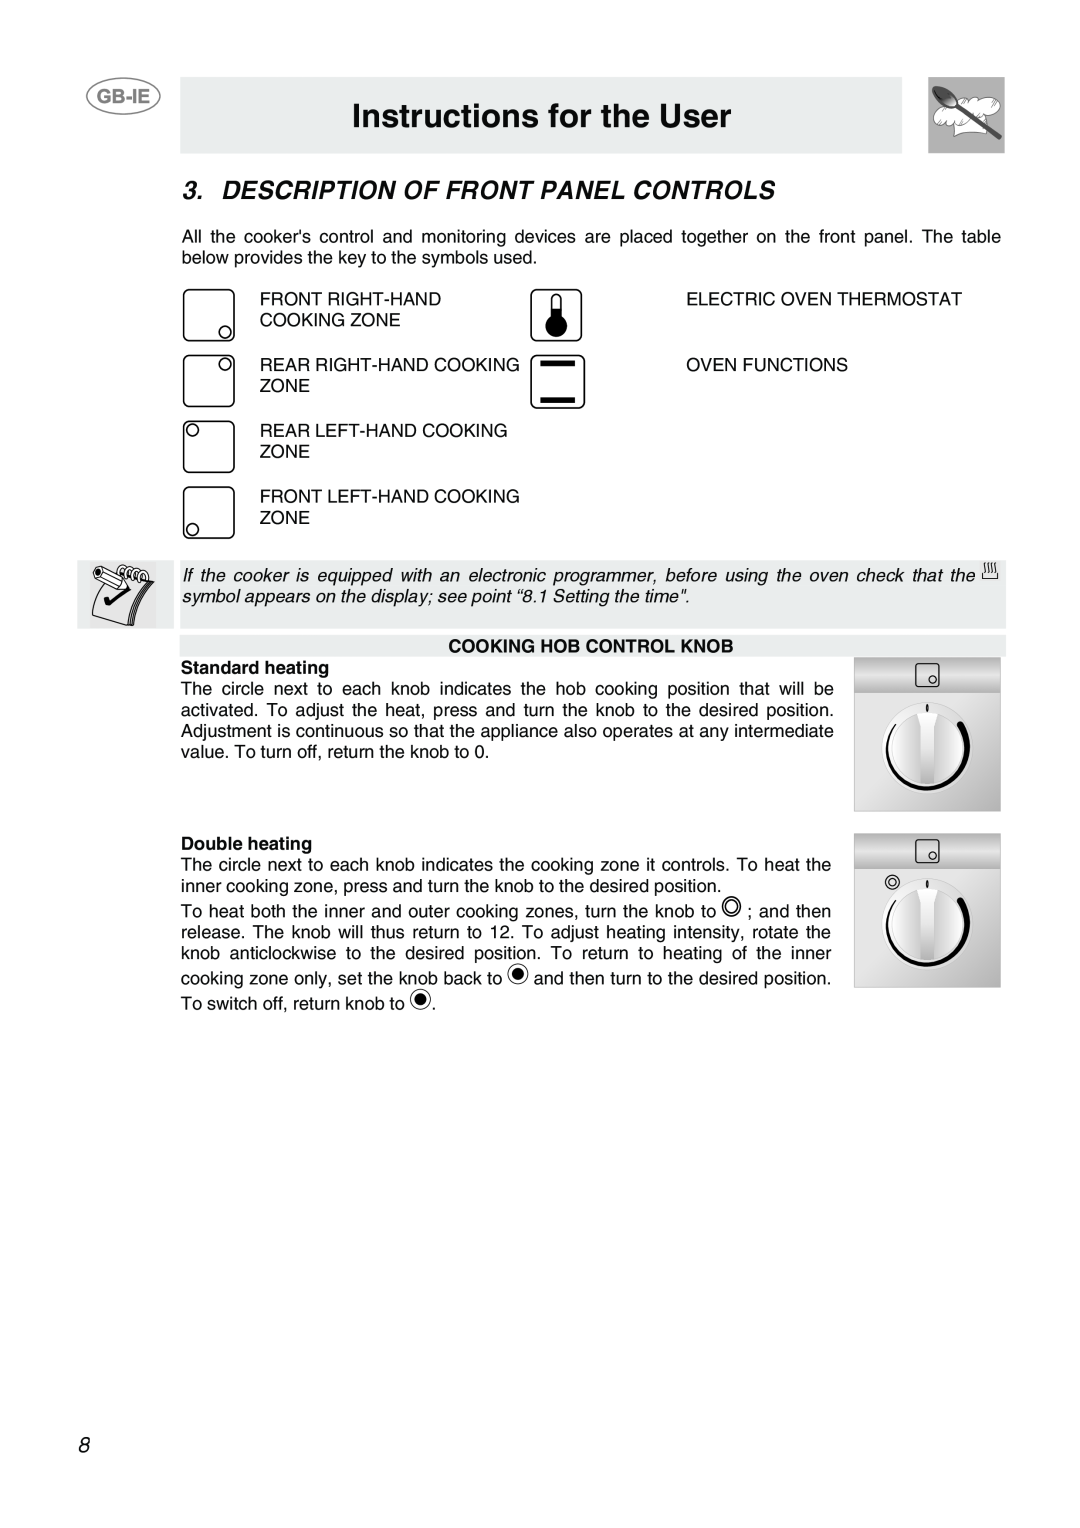 Smeg CB66CES Instructions for the User, Description Of Front Panel Controls, COOKING HOB CONTROL KNOB Standard heating 